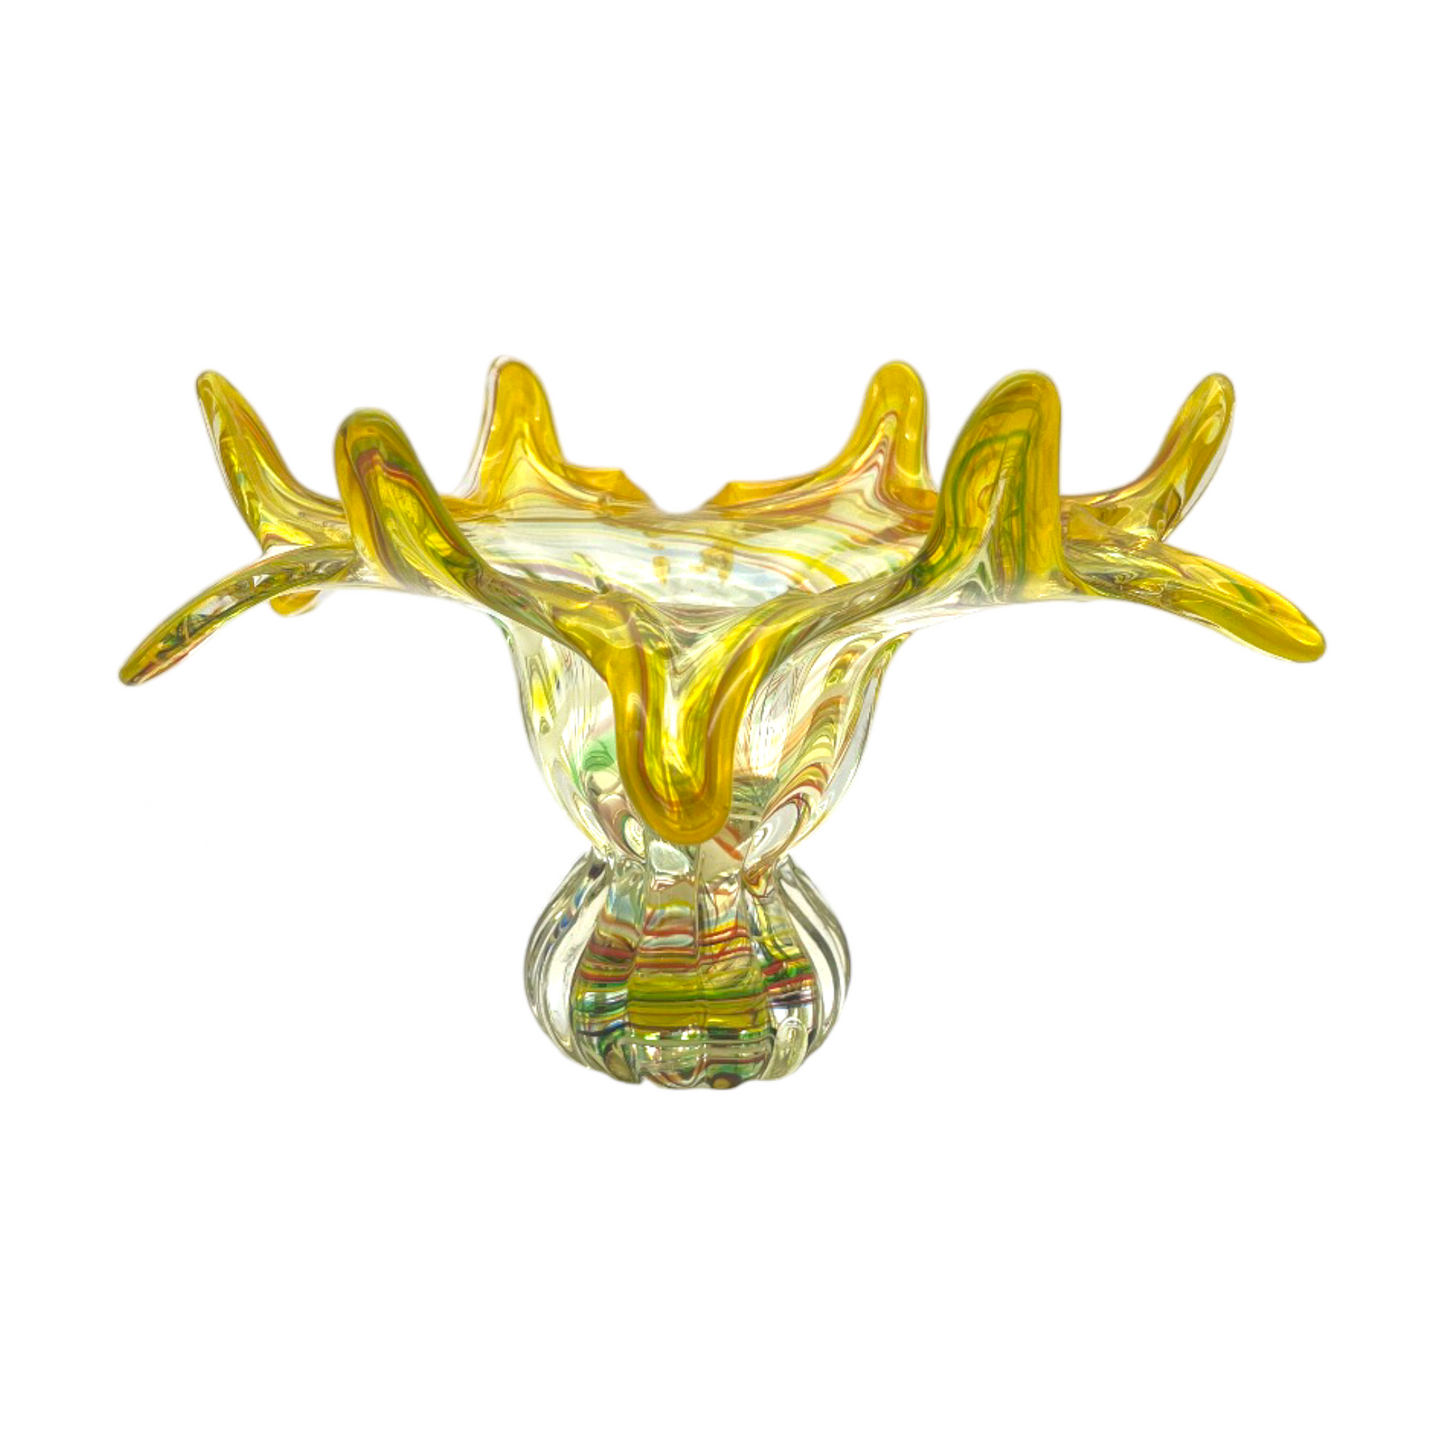 Enchanting Symphony: Handcrafted Murano Art Glass Compote - 7.5"